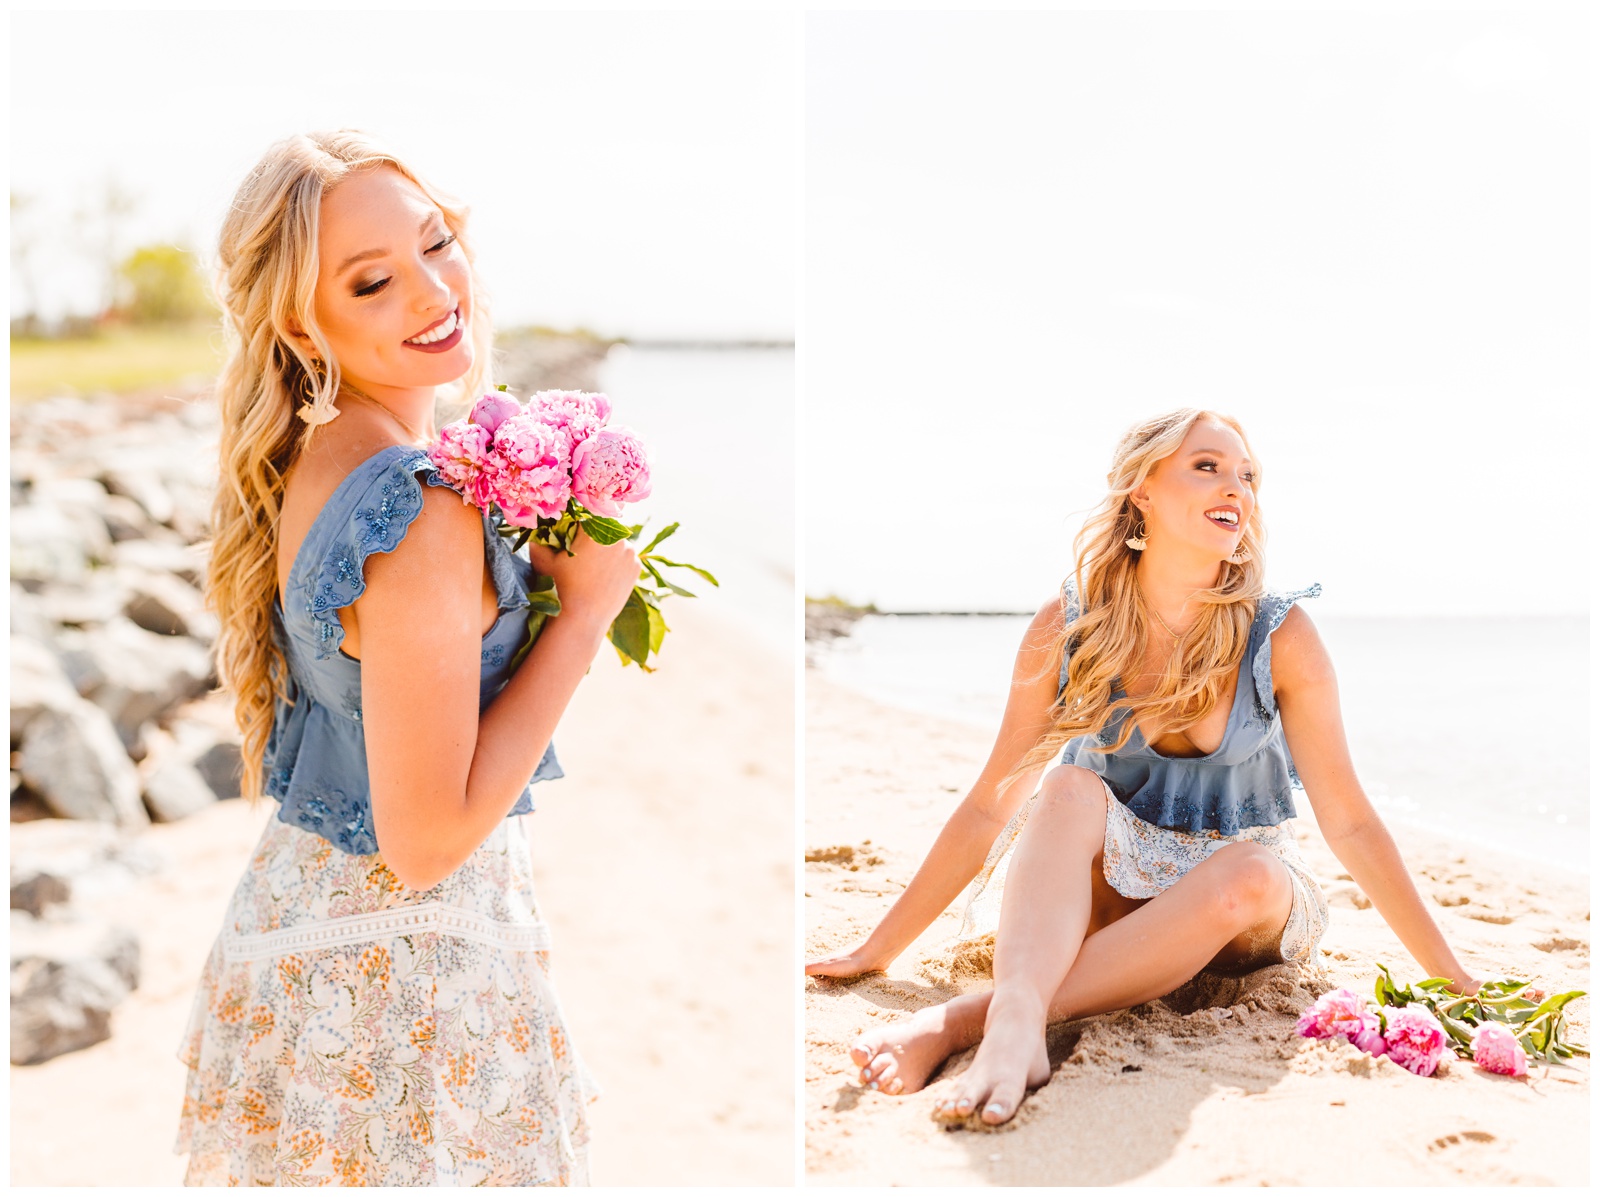 Boho and Whimsical - St Michaels, MD Senior Session - Brooke Michelle Photo